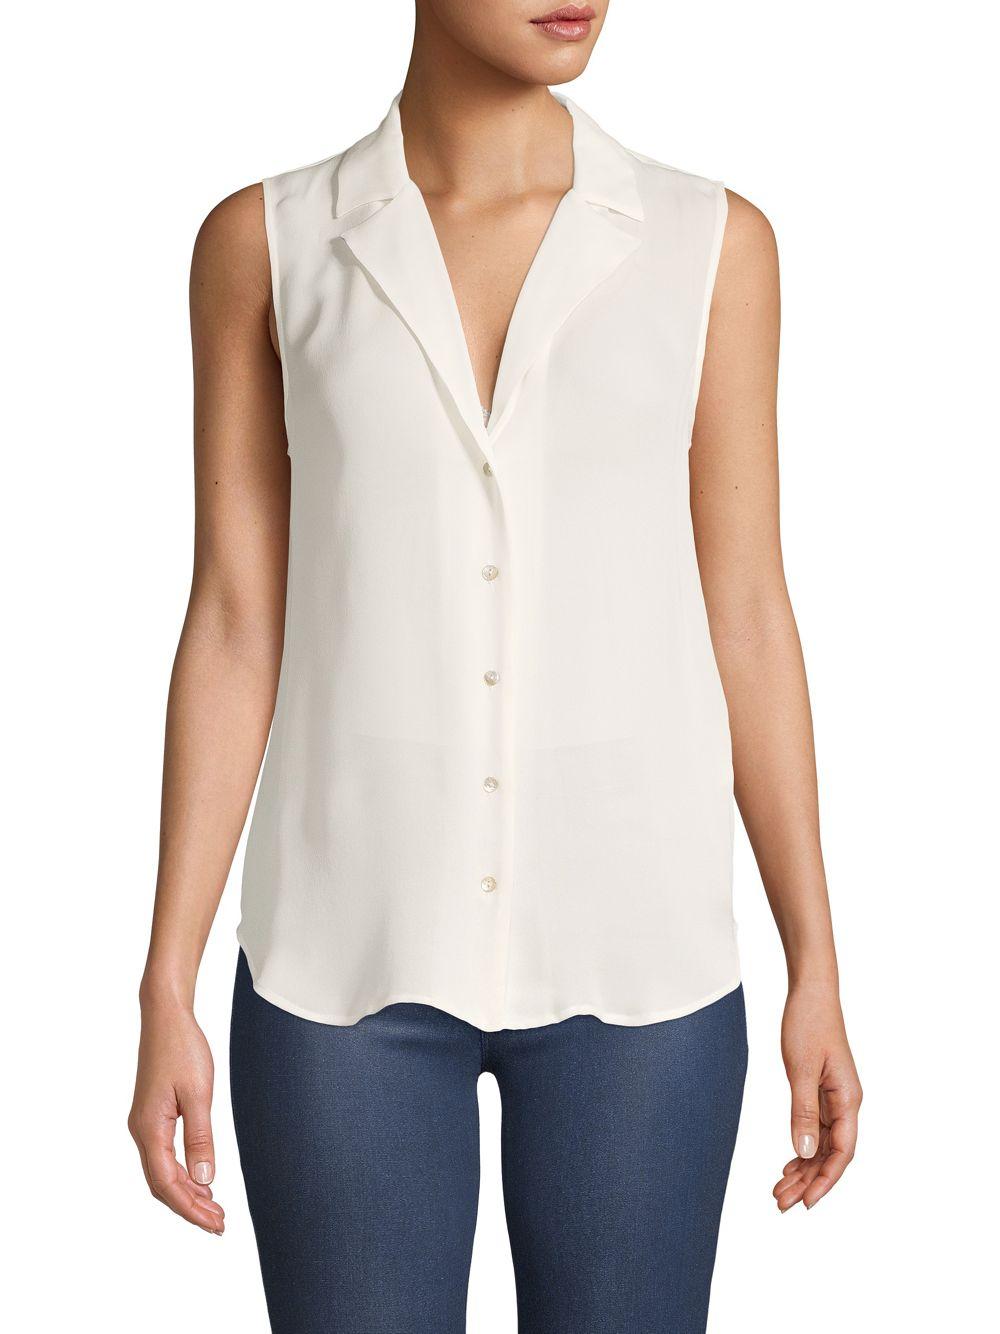 L'Agence Sleeveless Silk Button-down Shirt in White - Lyst